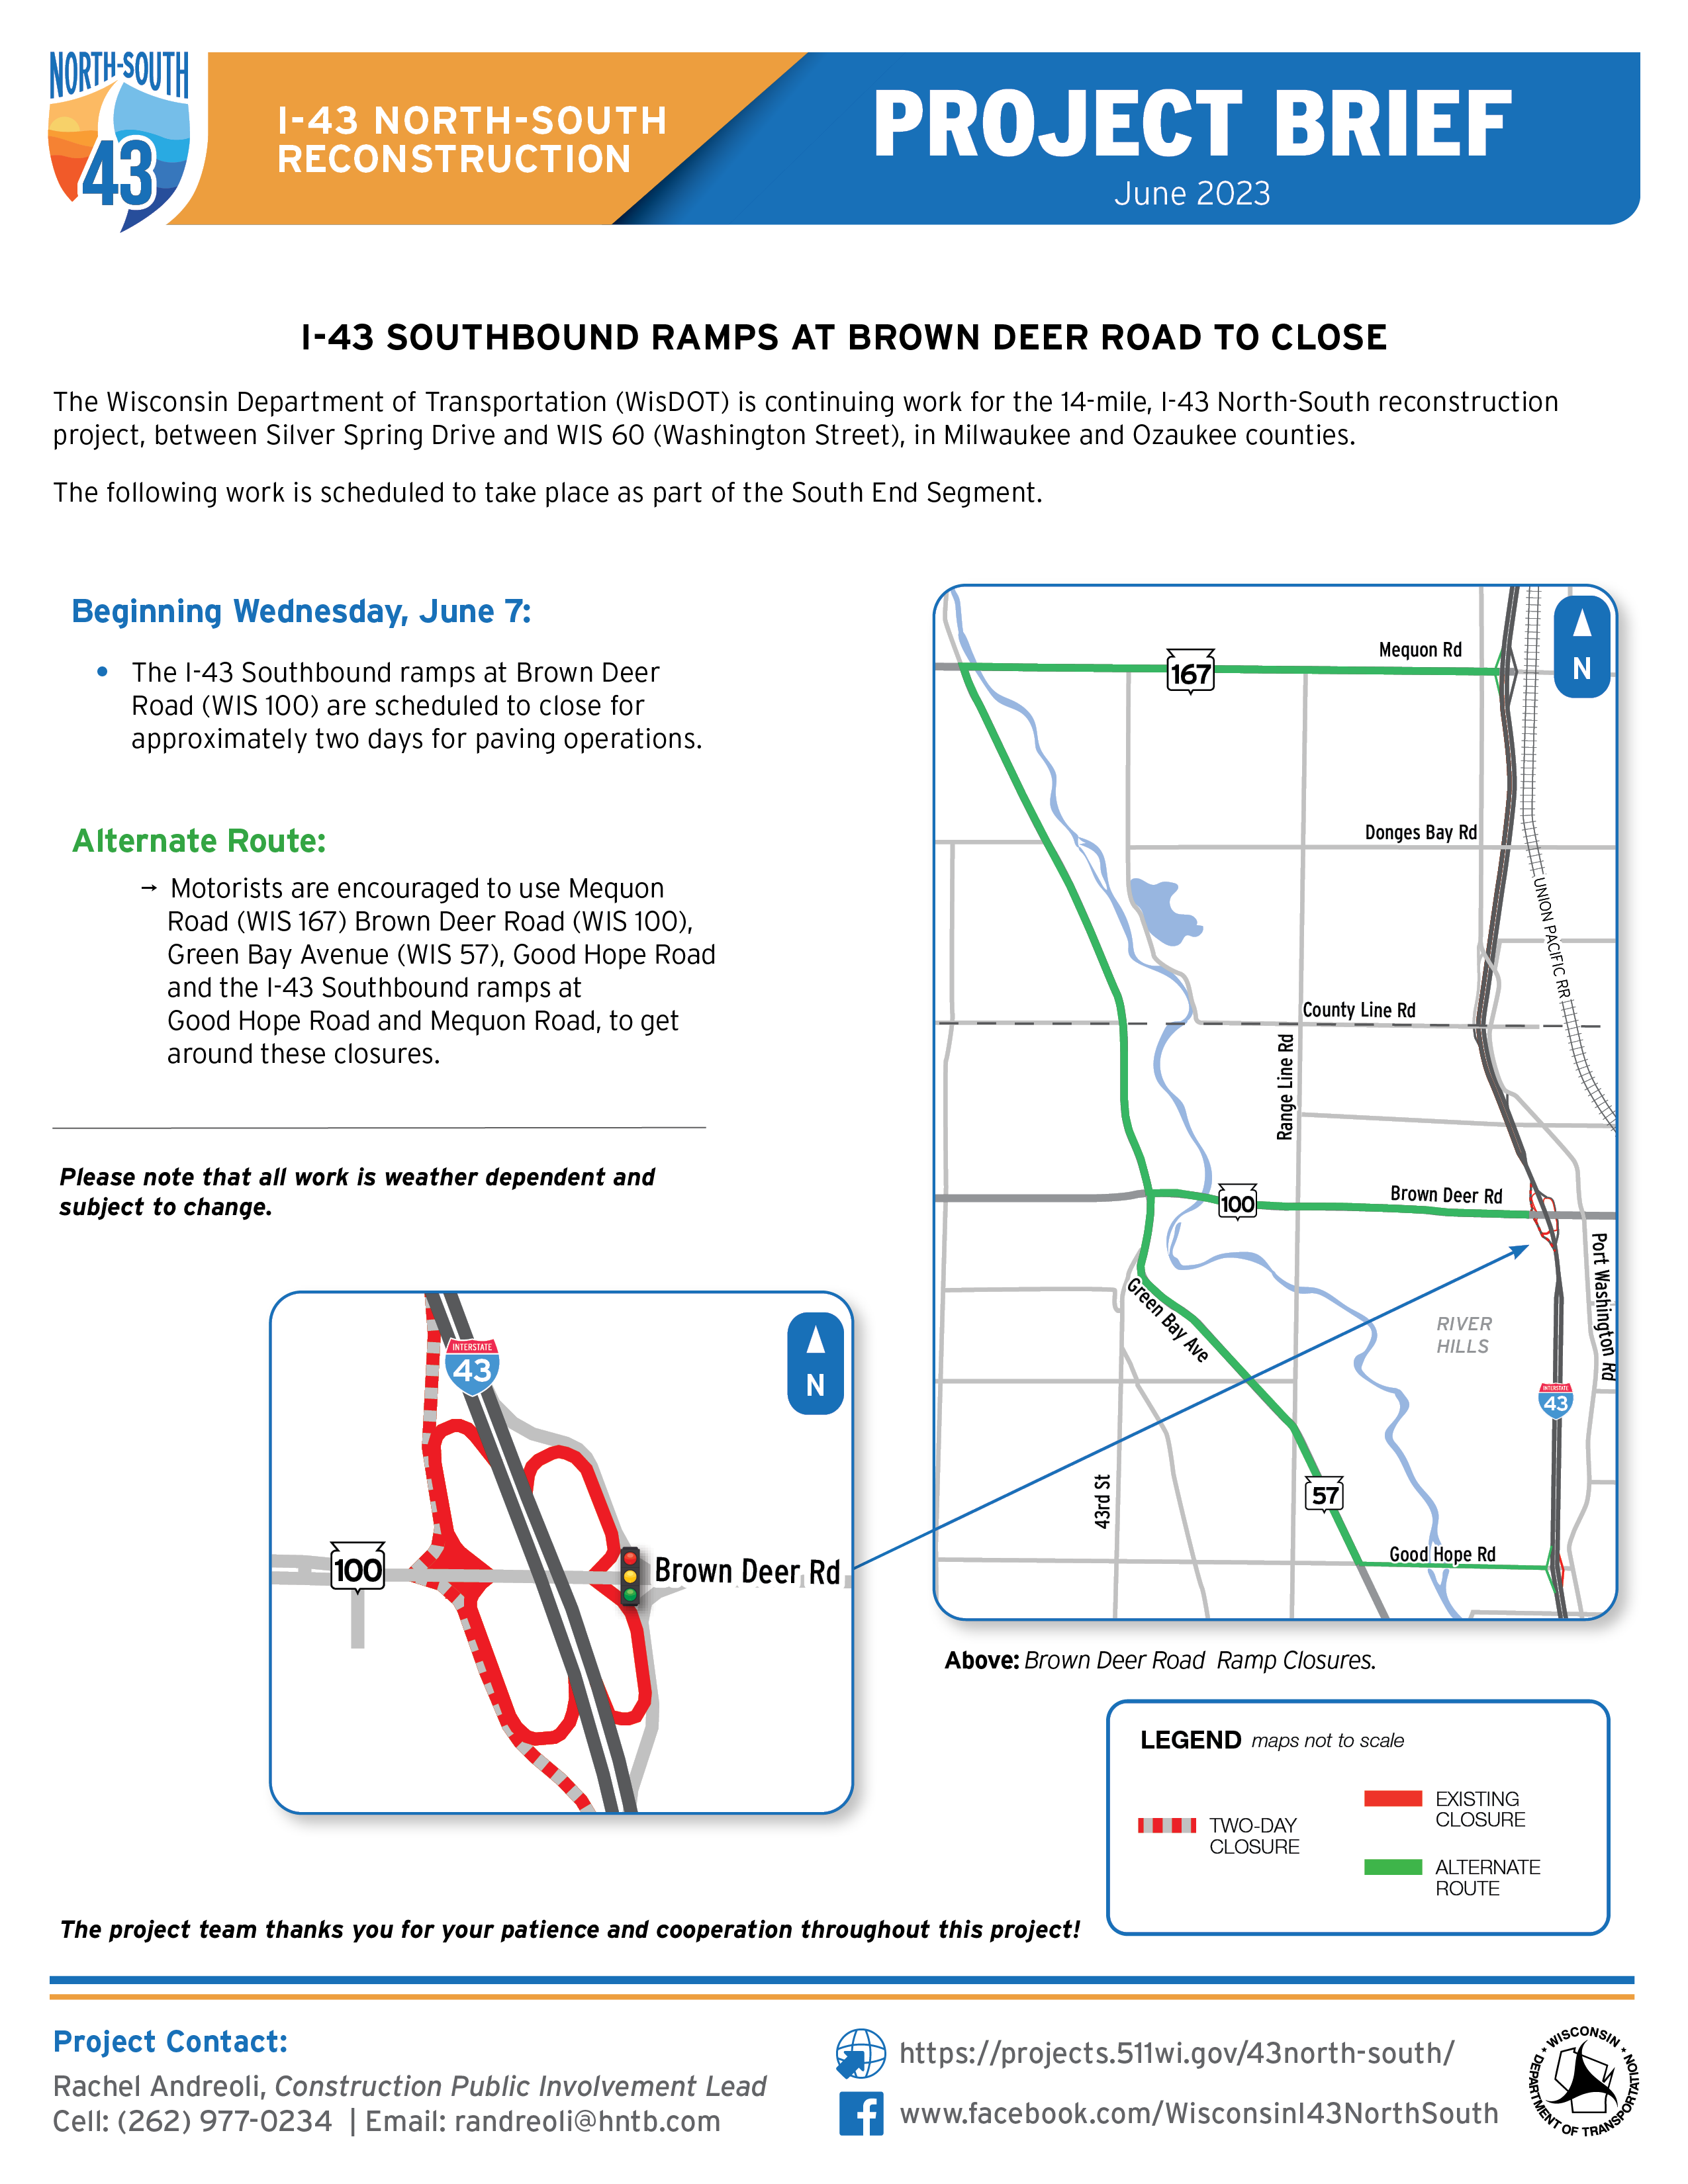 June 7, I-43 Southbound Ramps at Brown Deer Road to Close